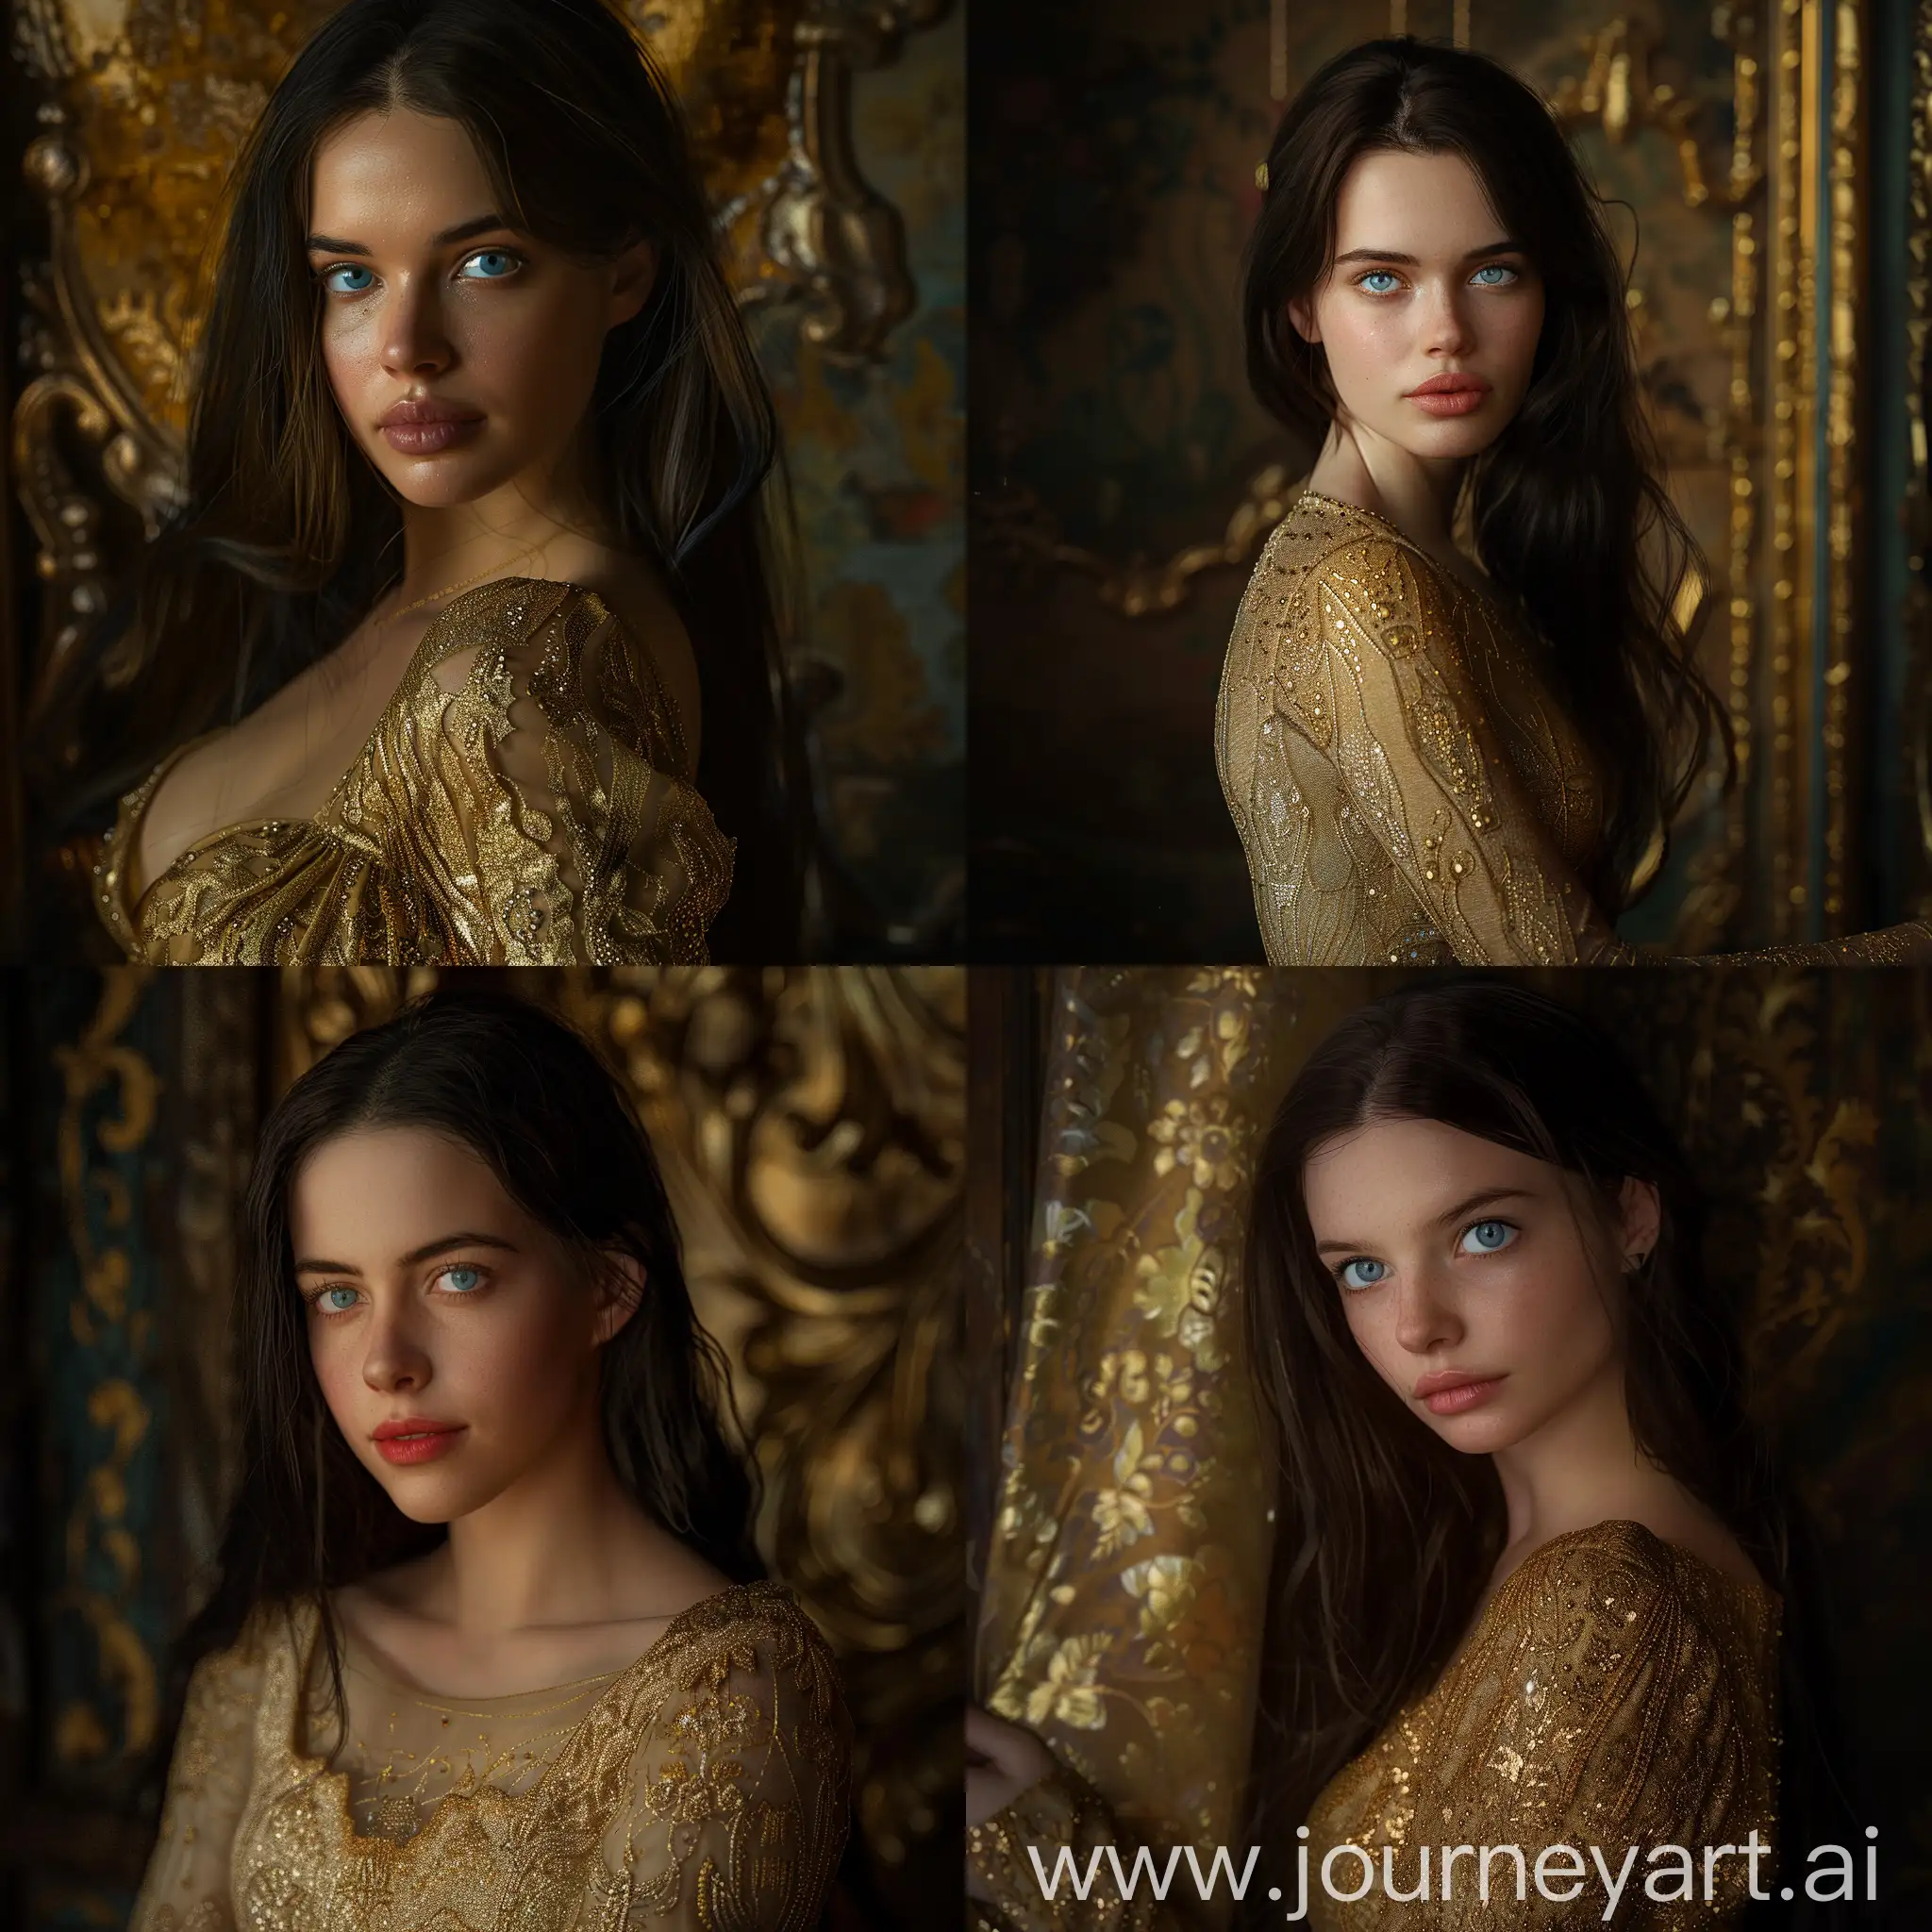  A portrait of a young woman in a gold dress, with long dark hair and blue eyes, looking at the camera with a serious expression, [ornate, intricate, highly detailed, elegant], [painting, in the style of Gustav Klimt], [cinematic lighting, soft focus, shallow depth of field, warm colors, golden hour, backlit], [85mm lens, f/2.8 aperture, ISO 100, 1/125 shutter speed], [smooth skin texture, detailed fabric texture], [ornate gold background, dark background], [ray tracing, global illumination, ambient occlusion, depth of field]